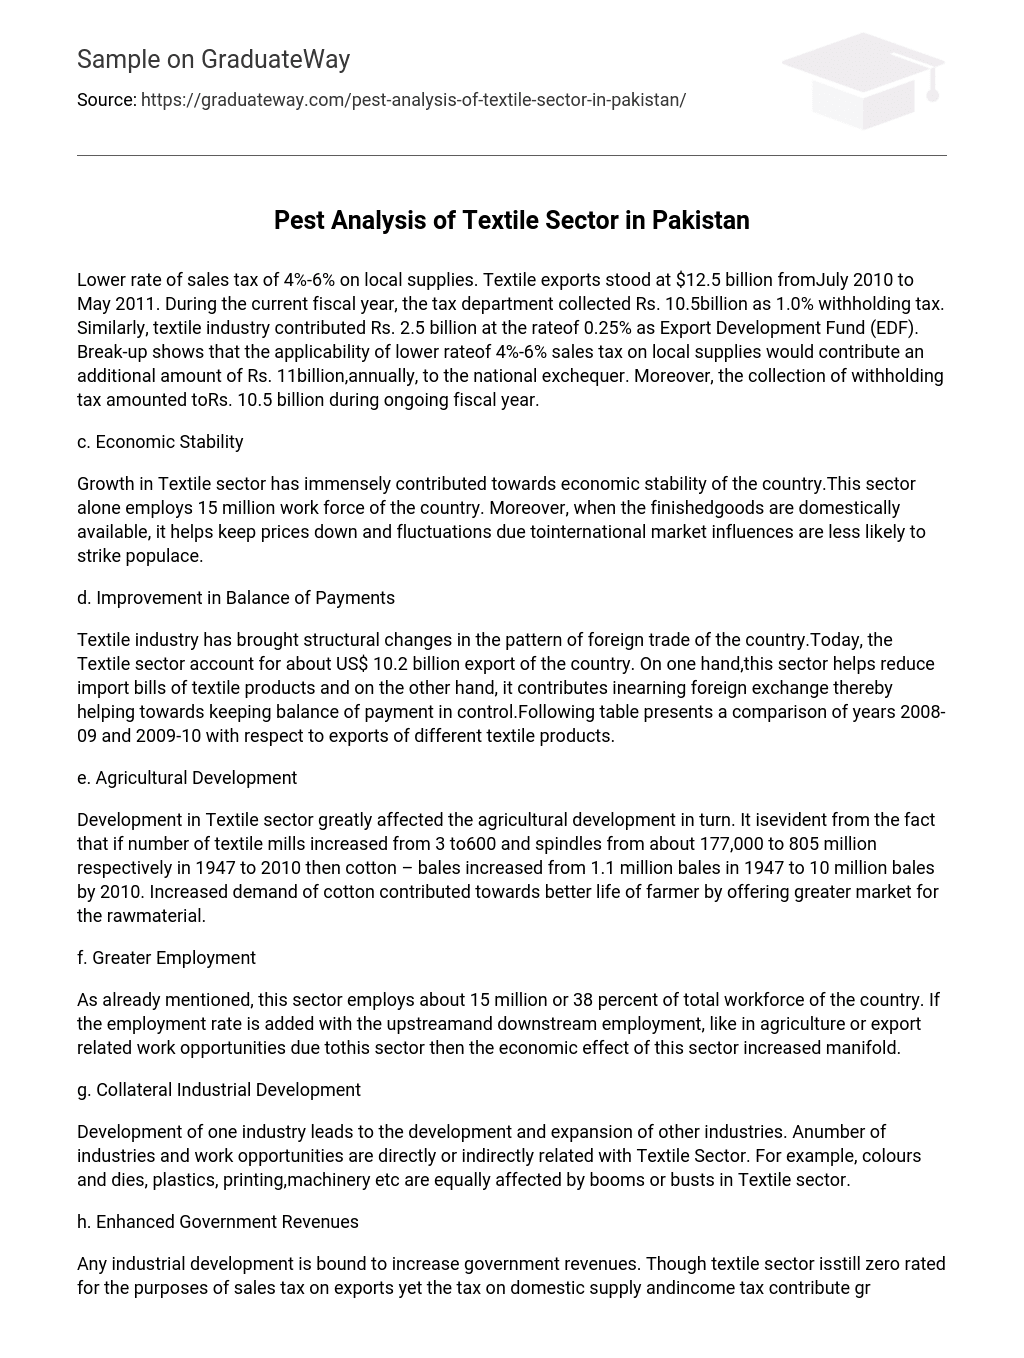 Pest Analysis of Textile Sector in Pakistan